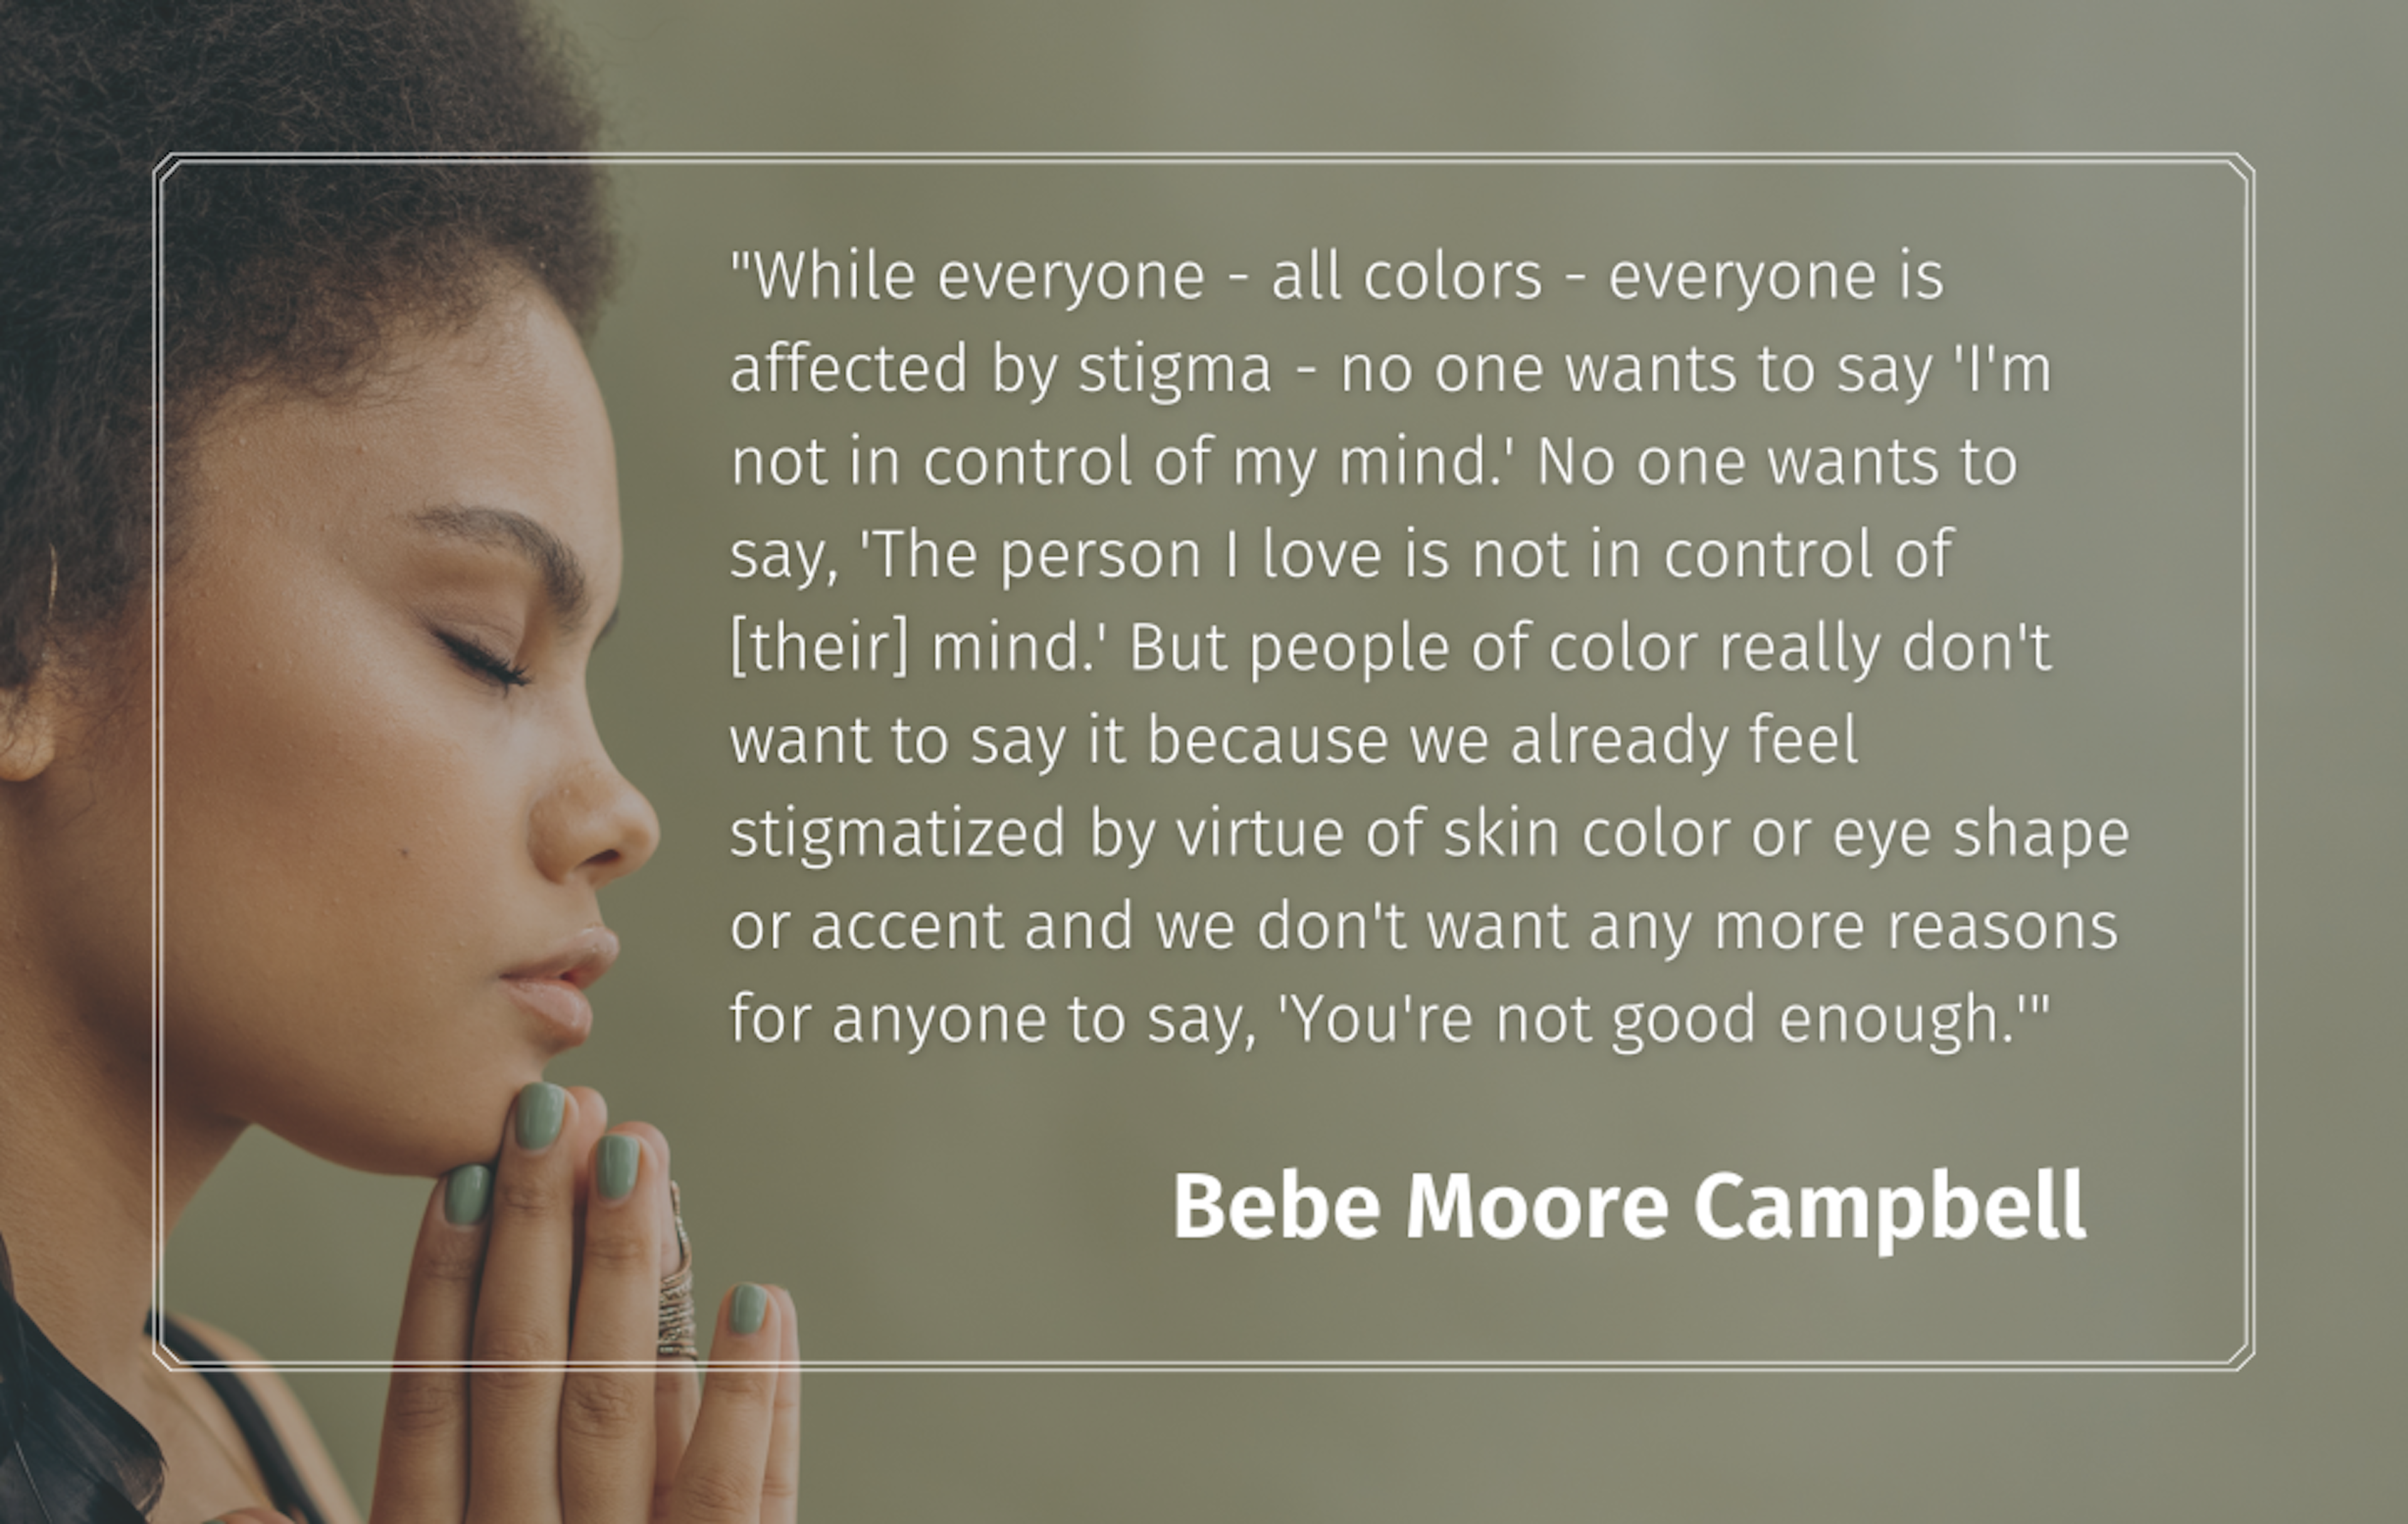 "While everyone - all colors - everyone is affected by stigma - no one wants to say 'I'm not in control of my mind.' No one wants to say, 'The person I love is not in control of [their] mind.'... Bebe Moore Campbell